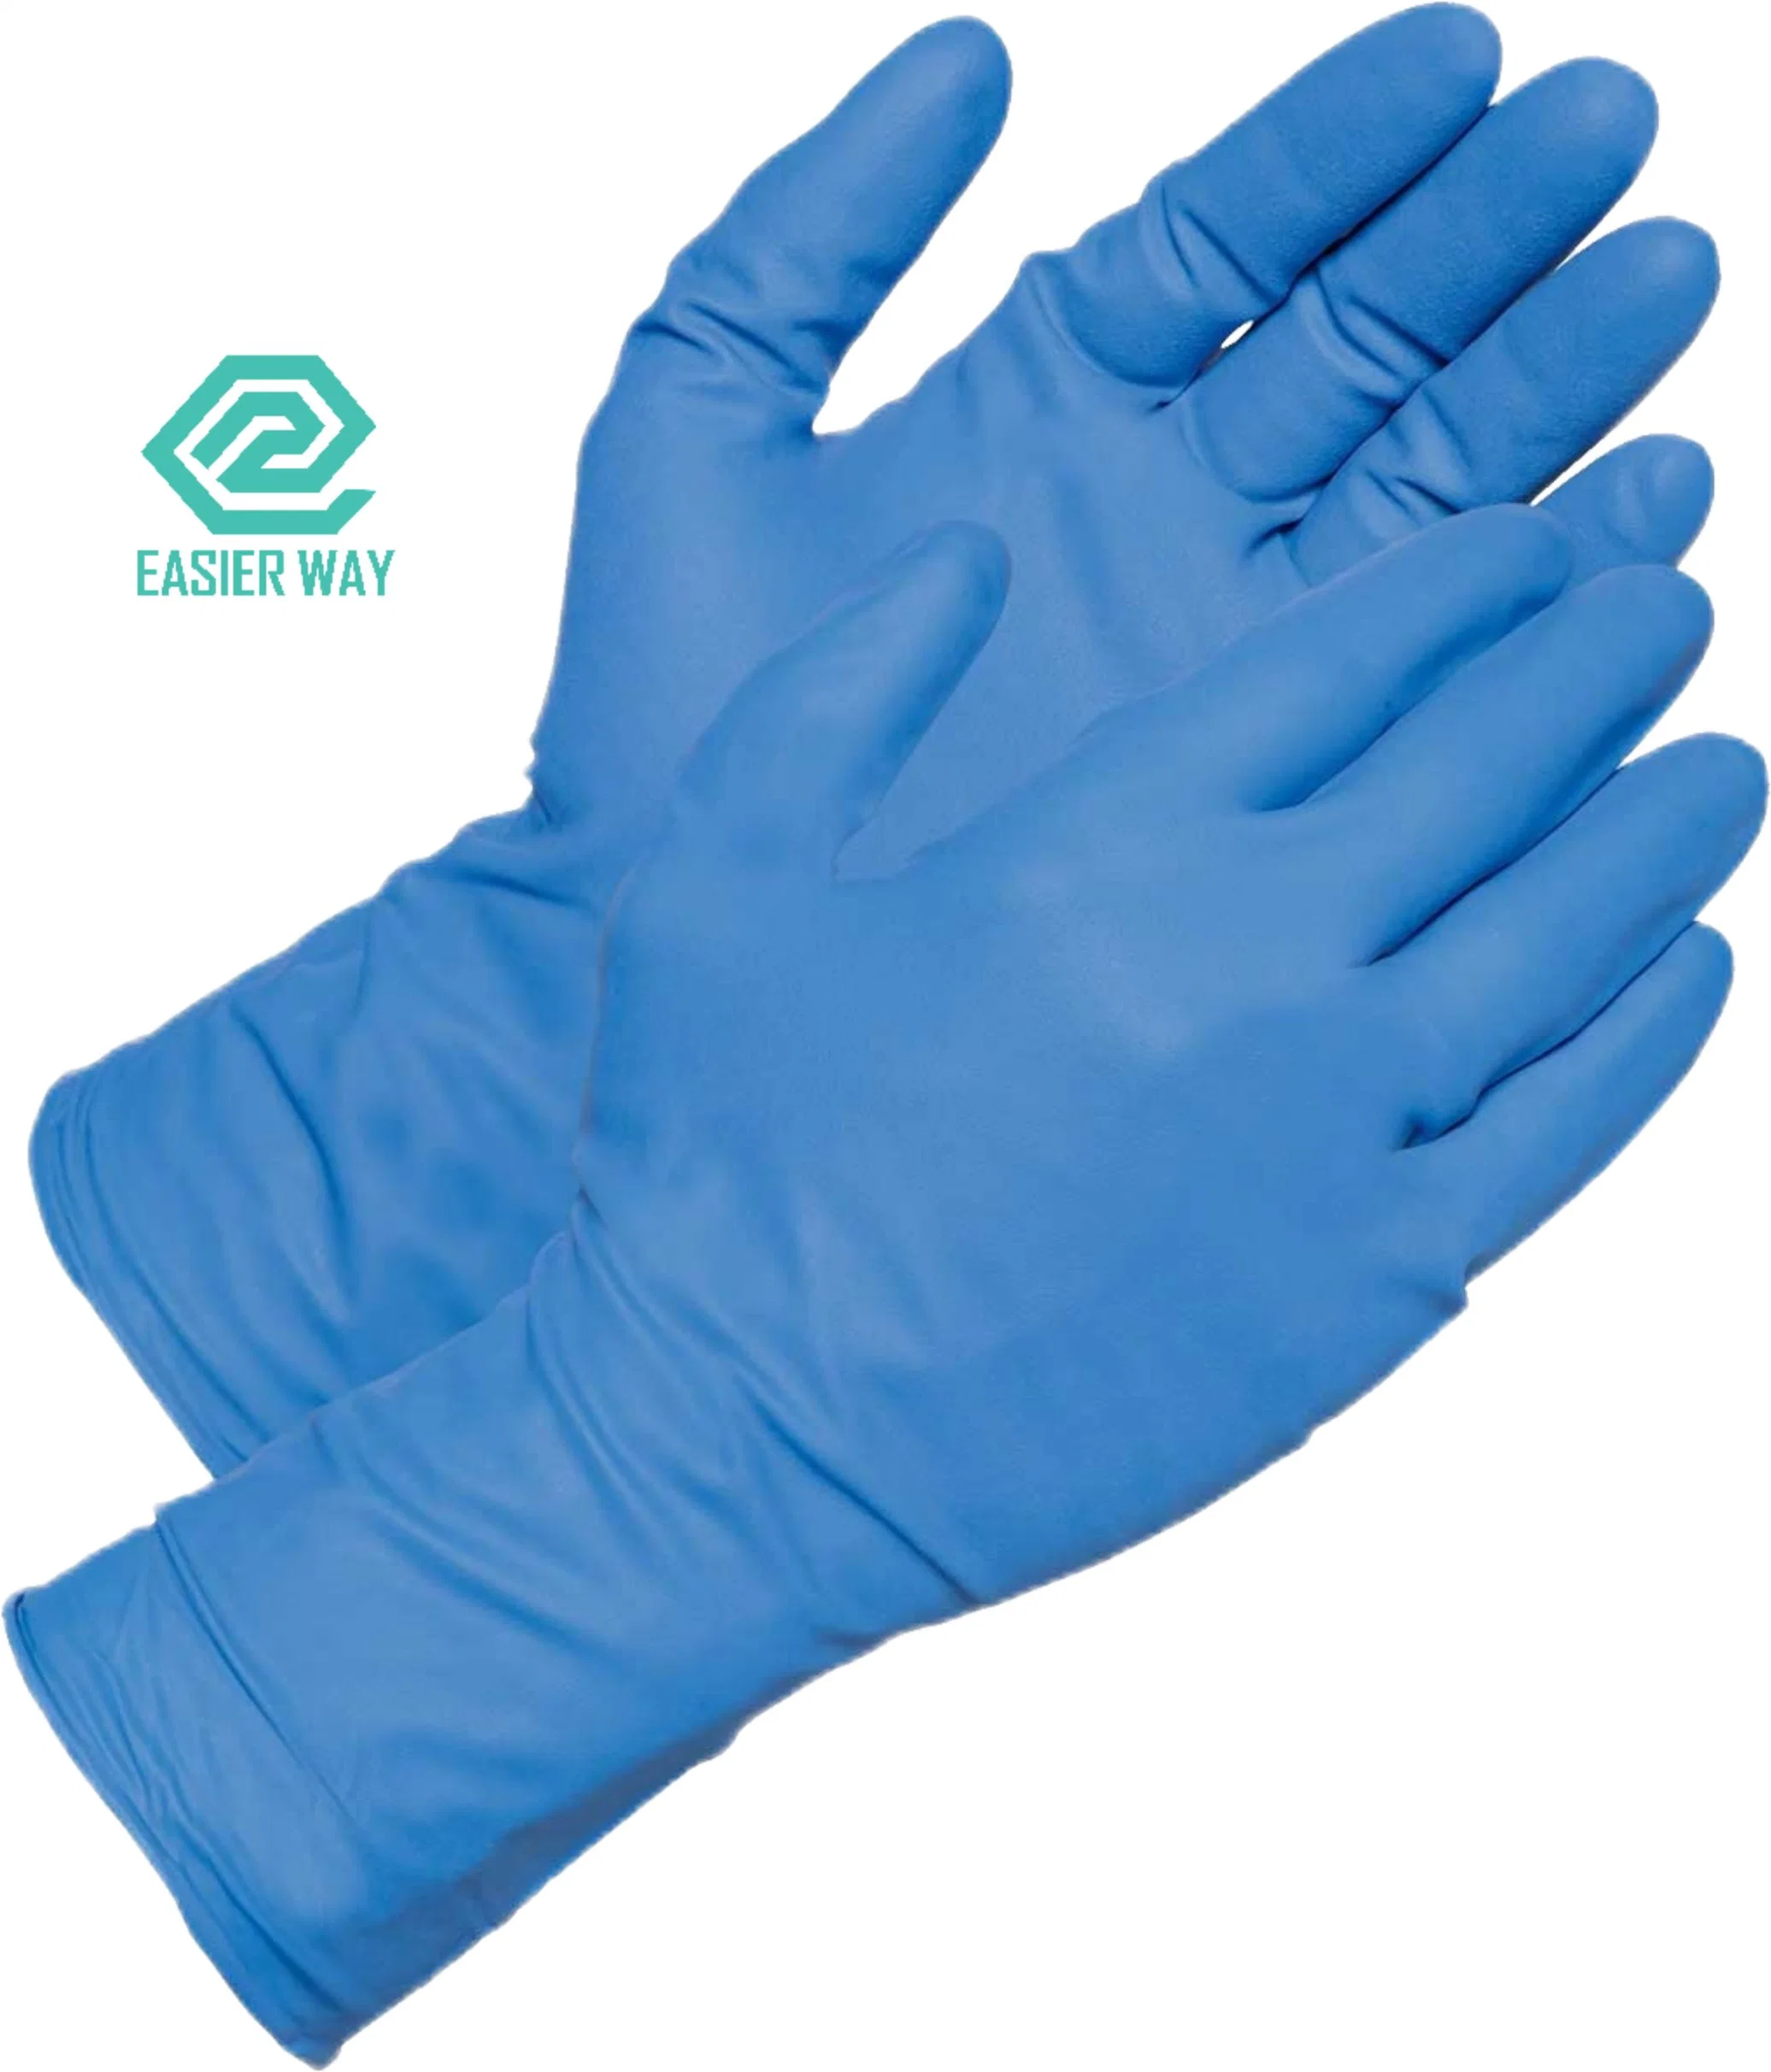 ISO Approved Powder Free Blue Nitrile Disposable Gloves for Medical Use